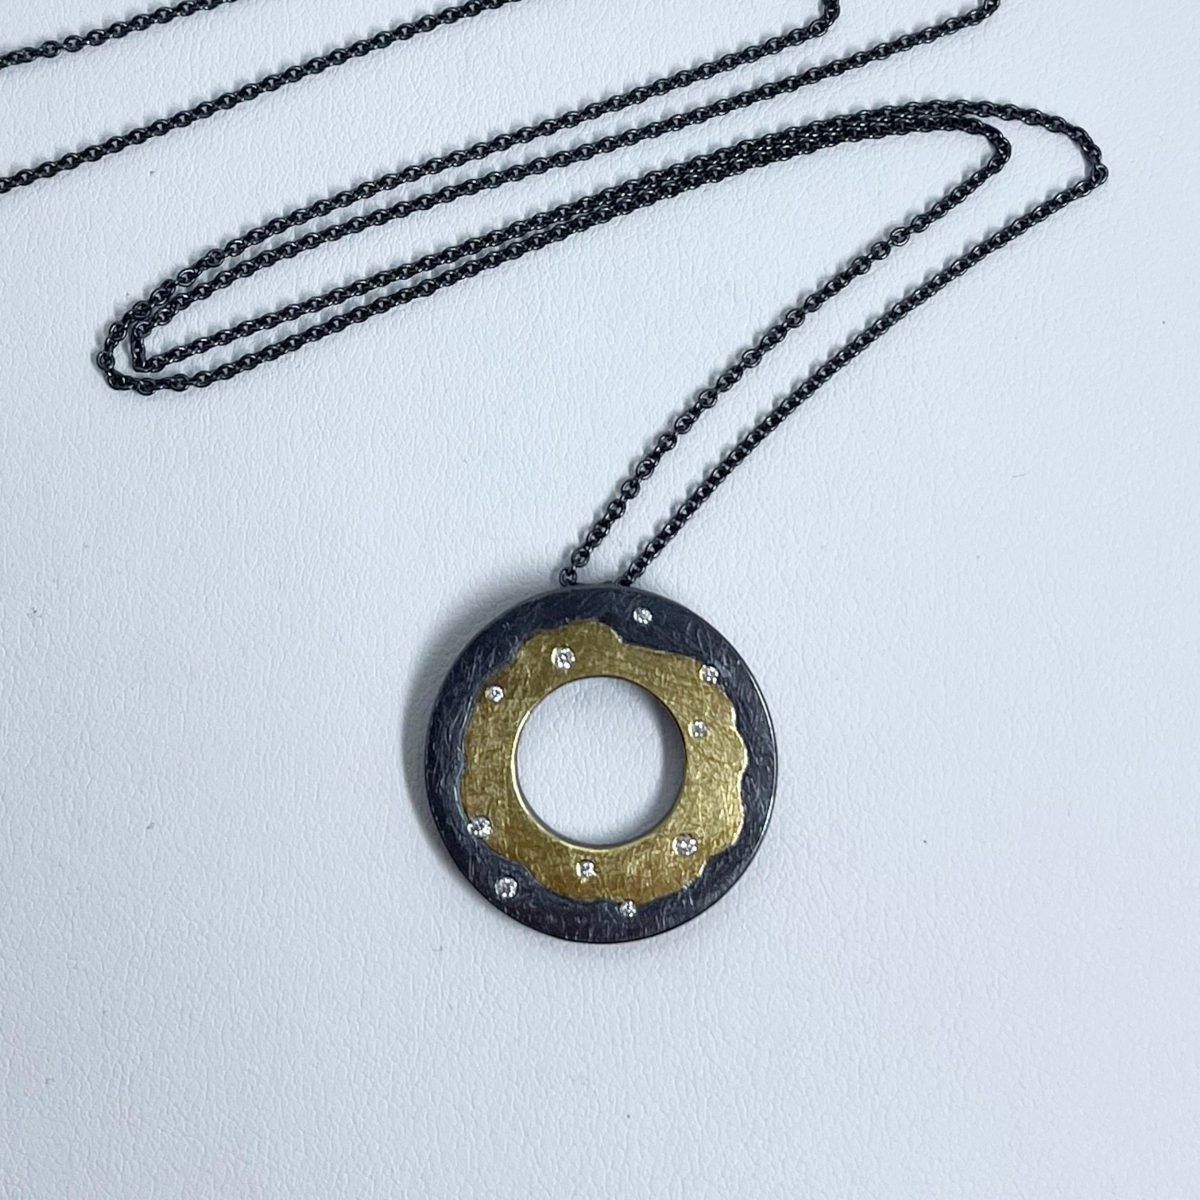 Handforged Oxidized Silver, Gold and Diamond Pendant